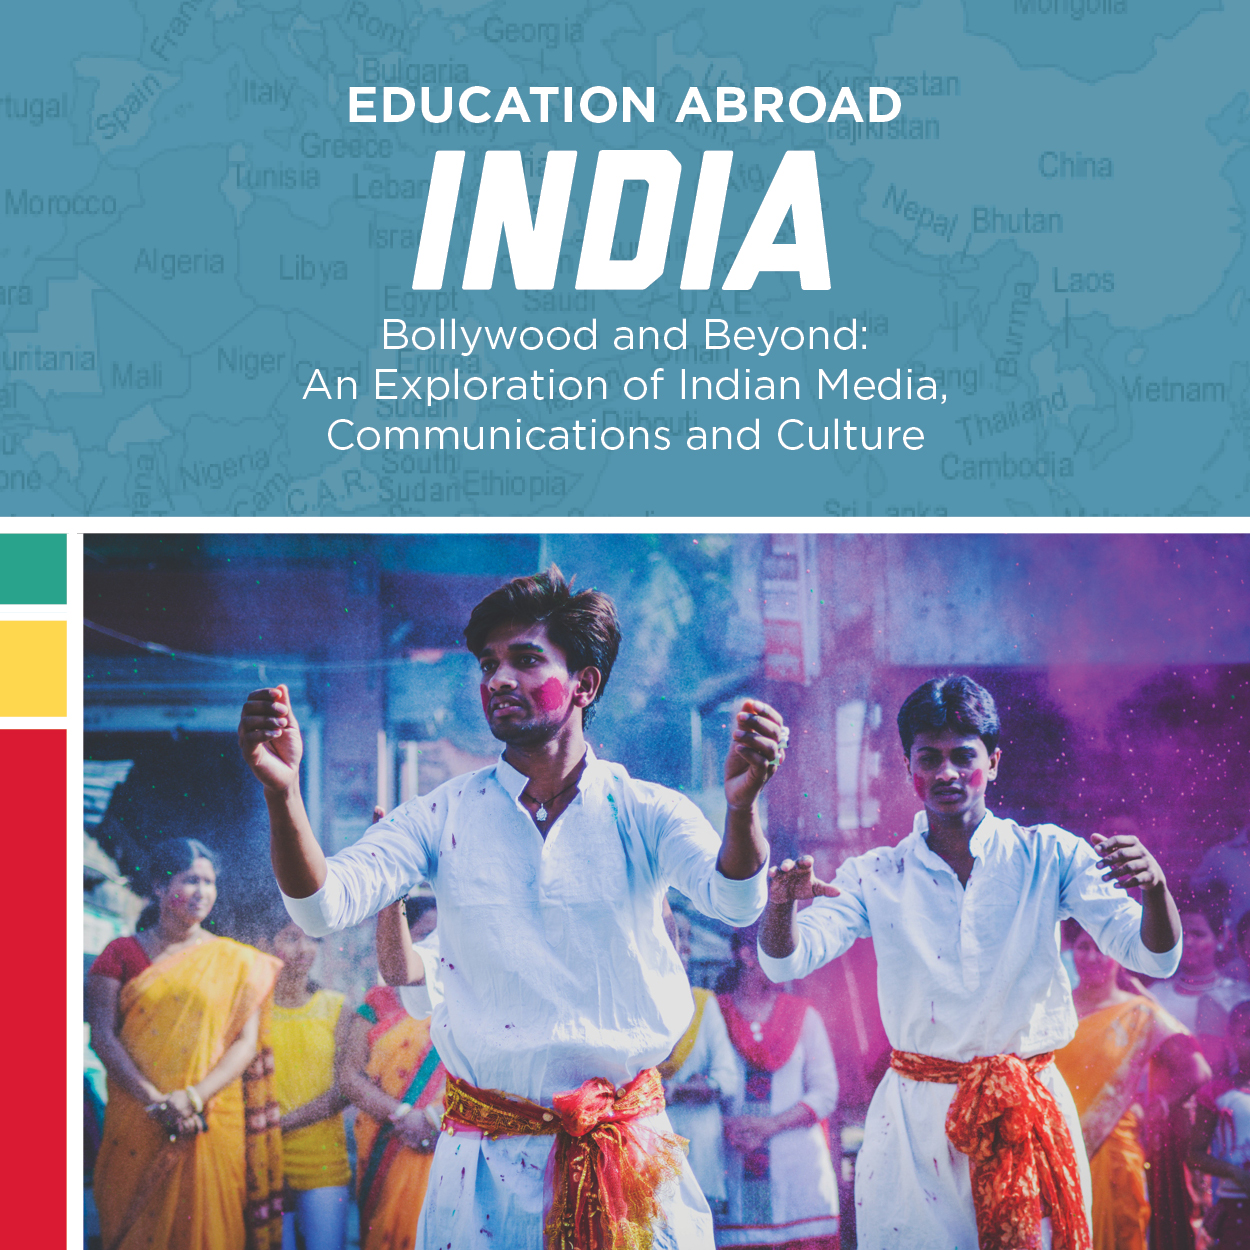 Application deadline for India Study Abroad trip extended Announce